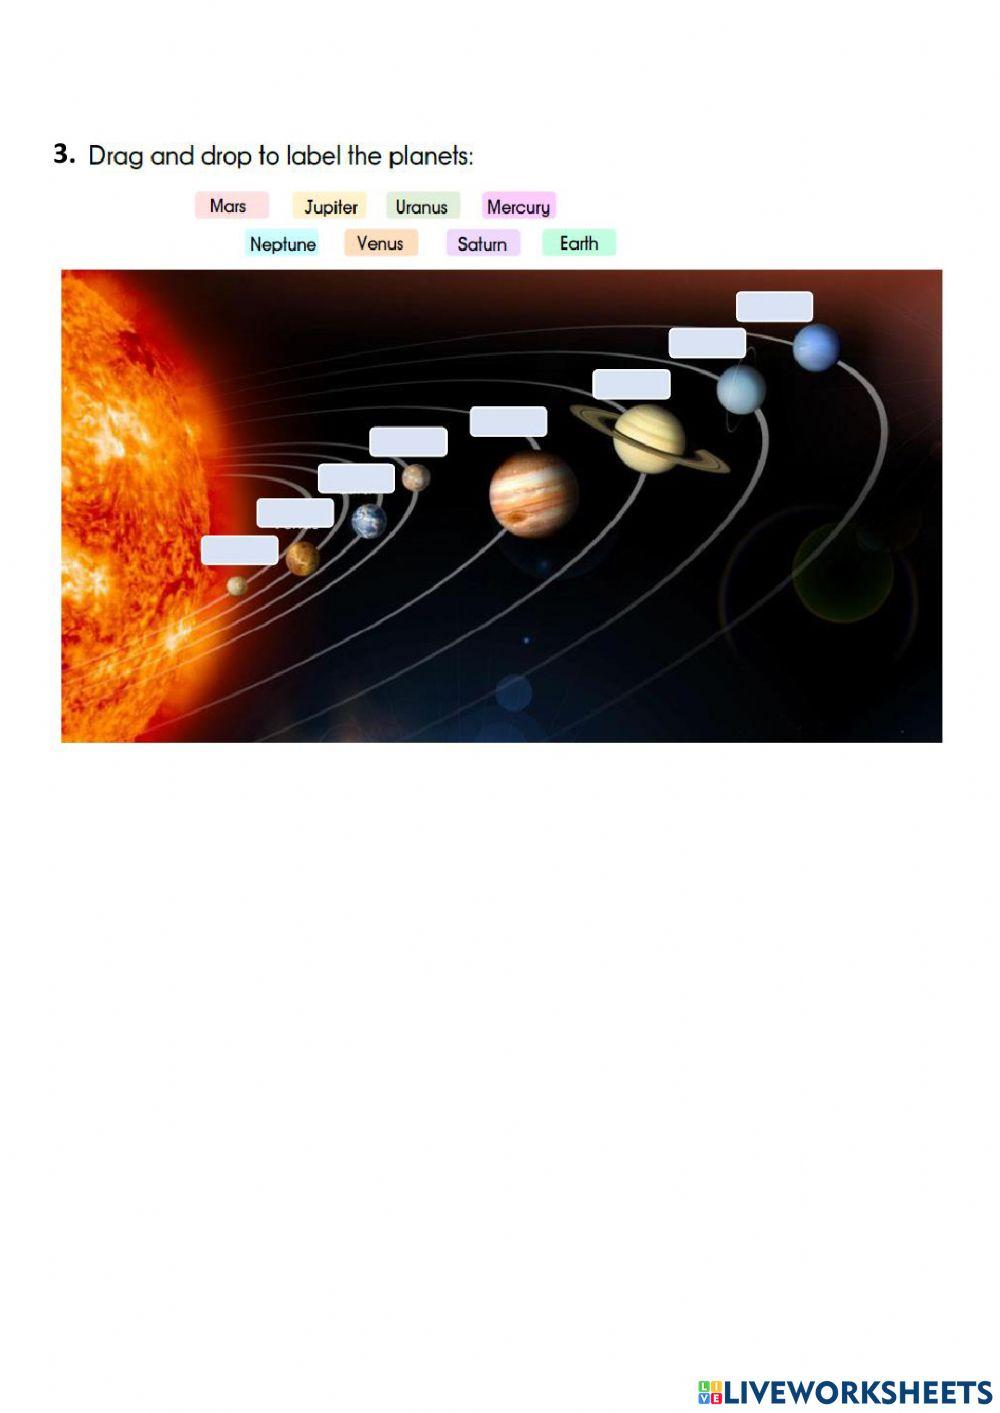 Members of the Solar System